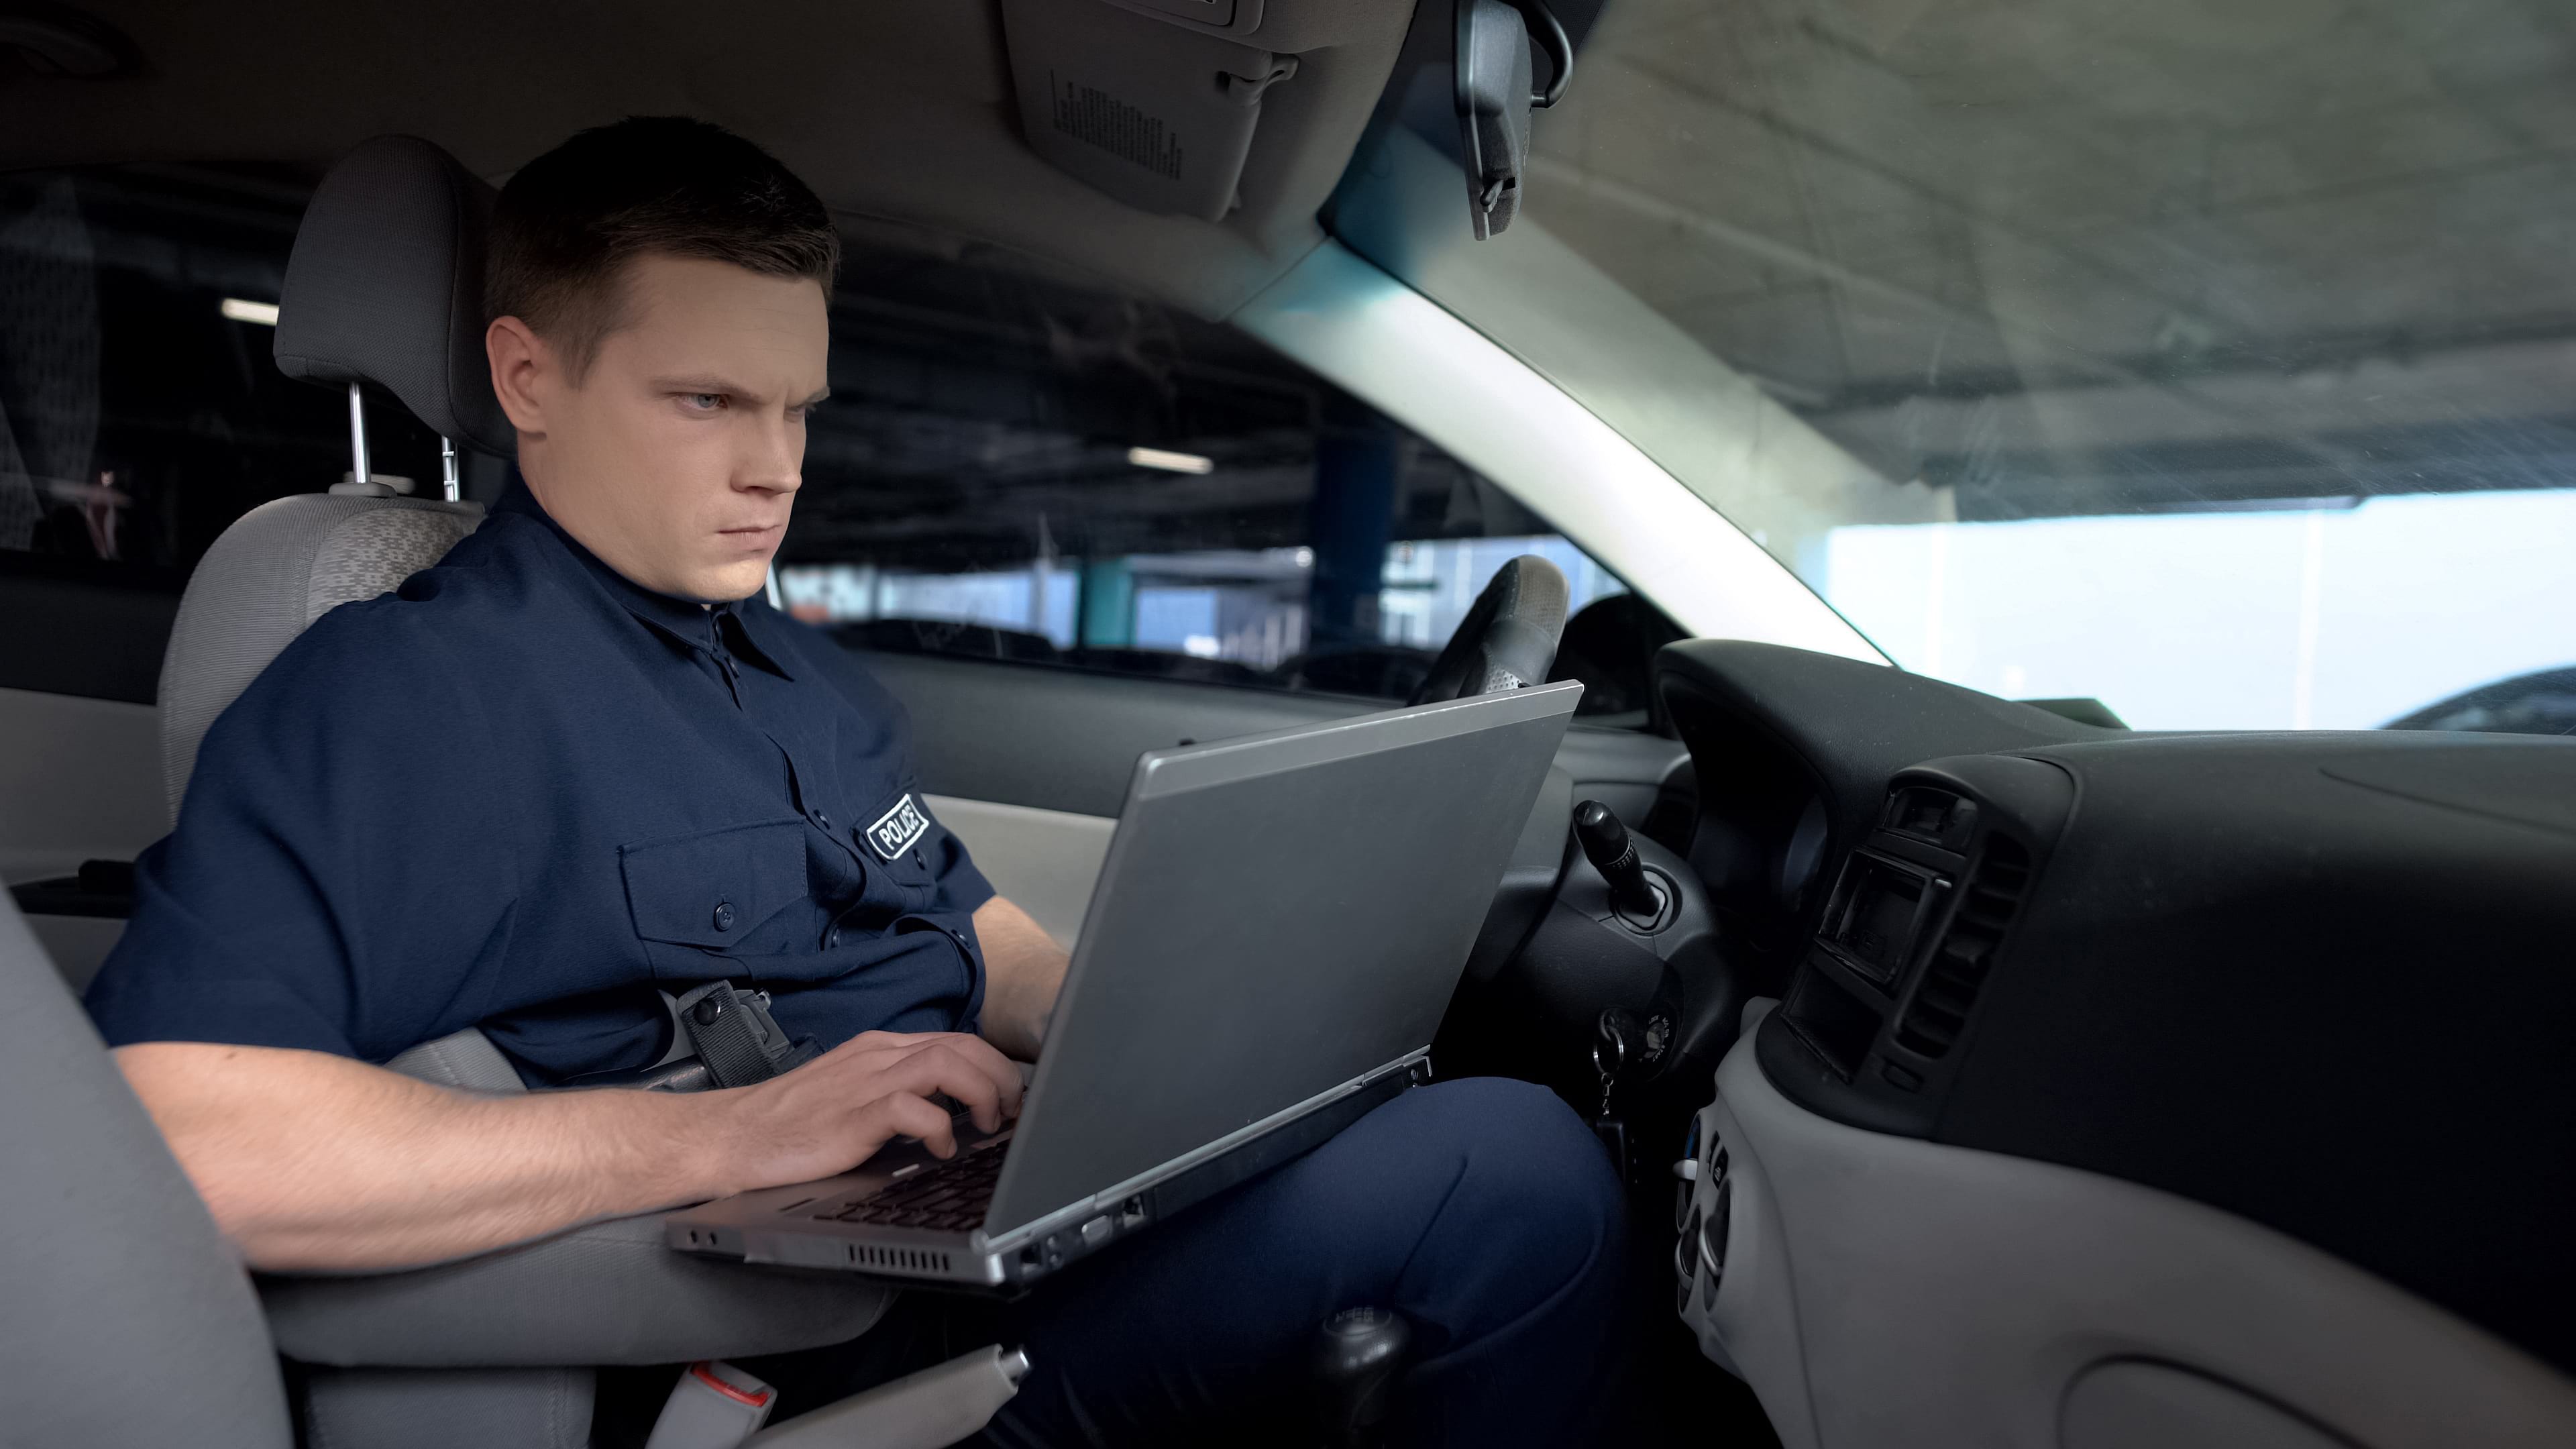 Police officer in patrol car with laptop